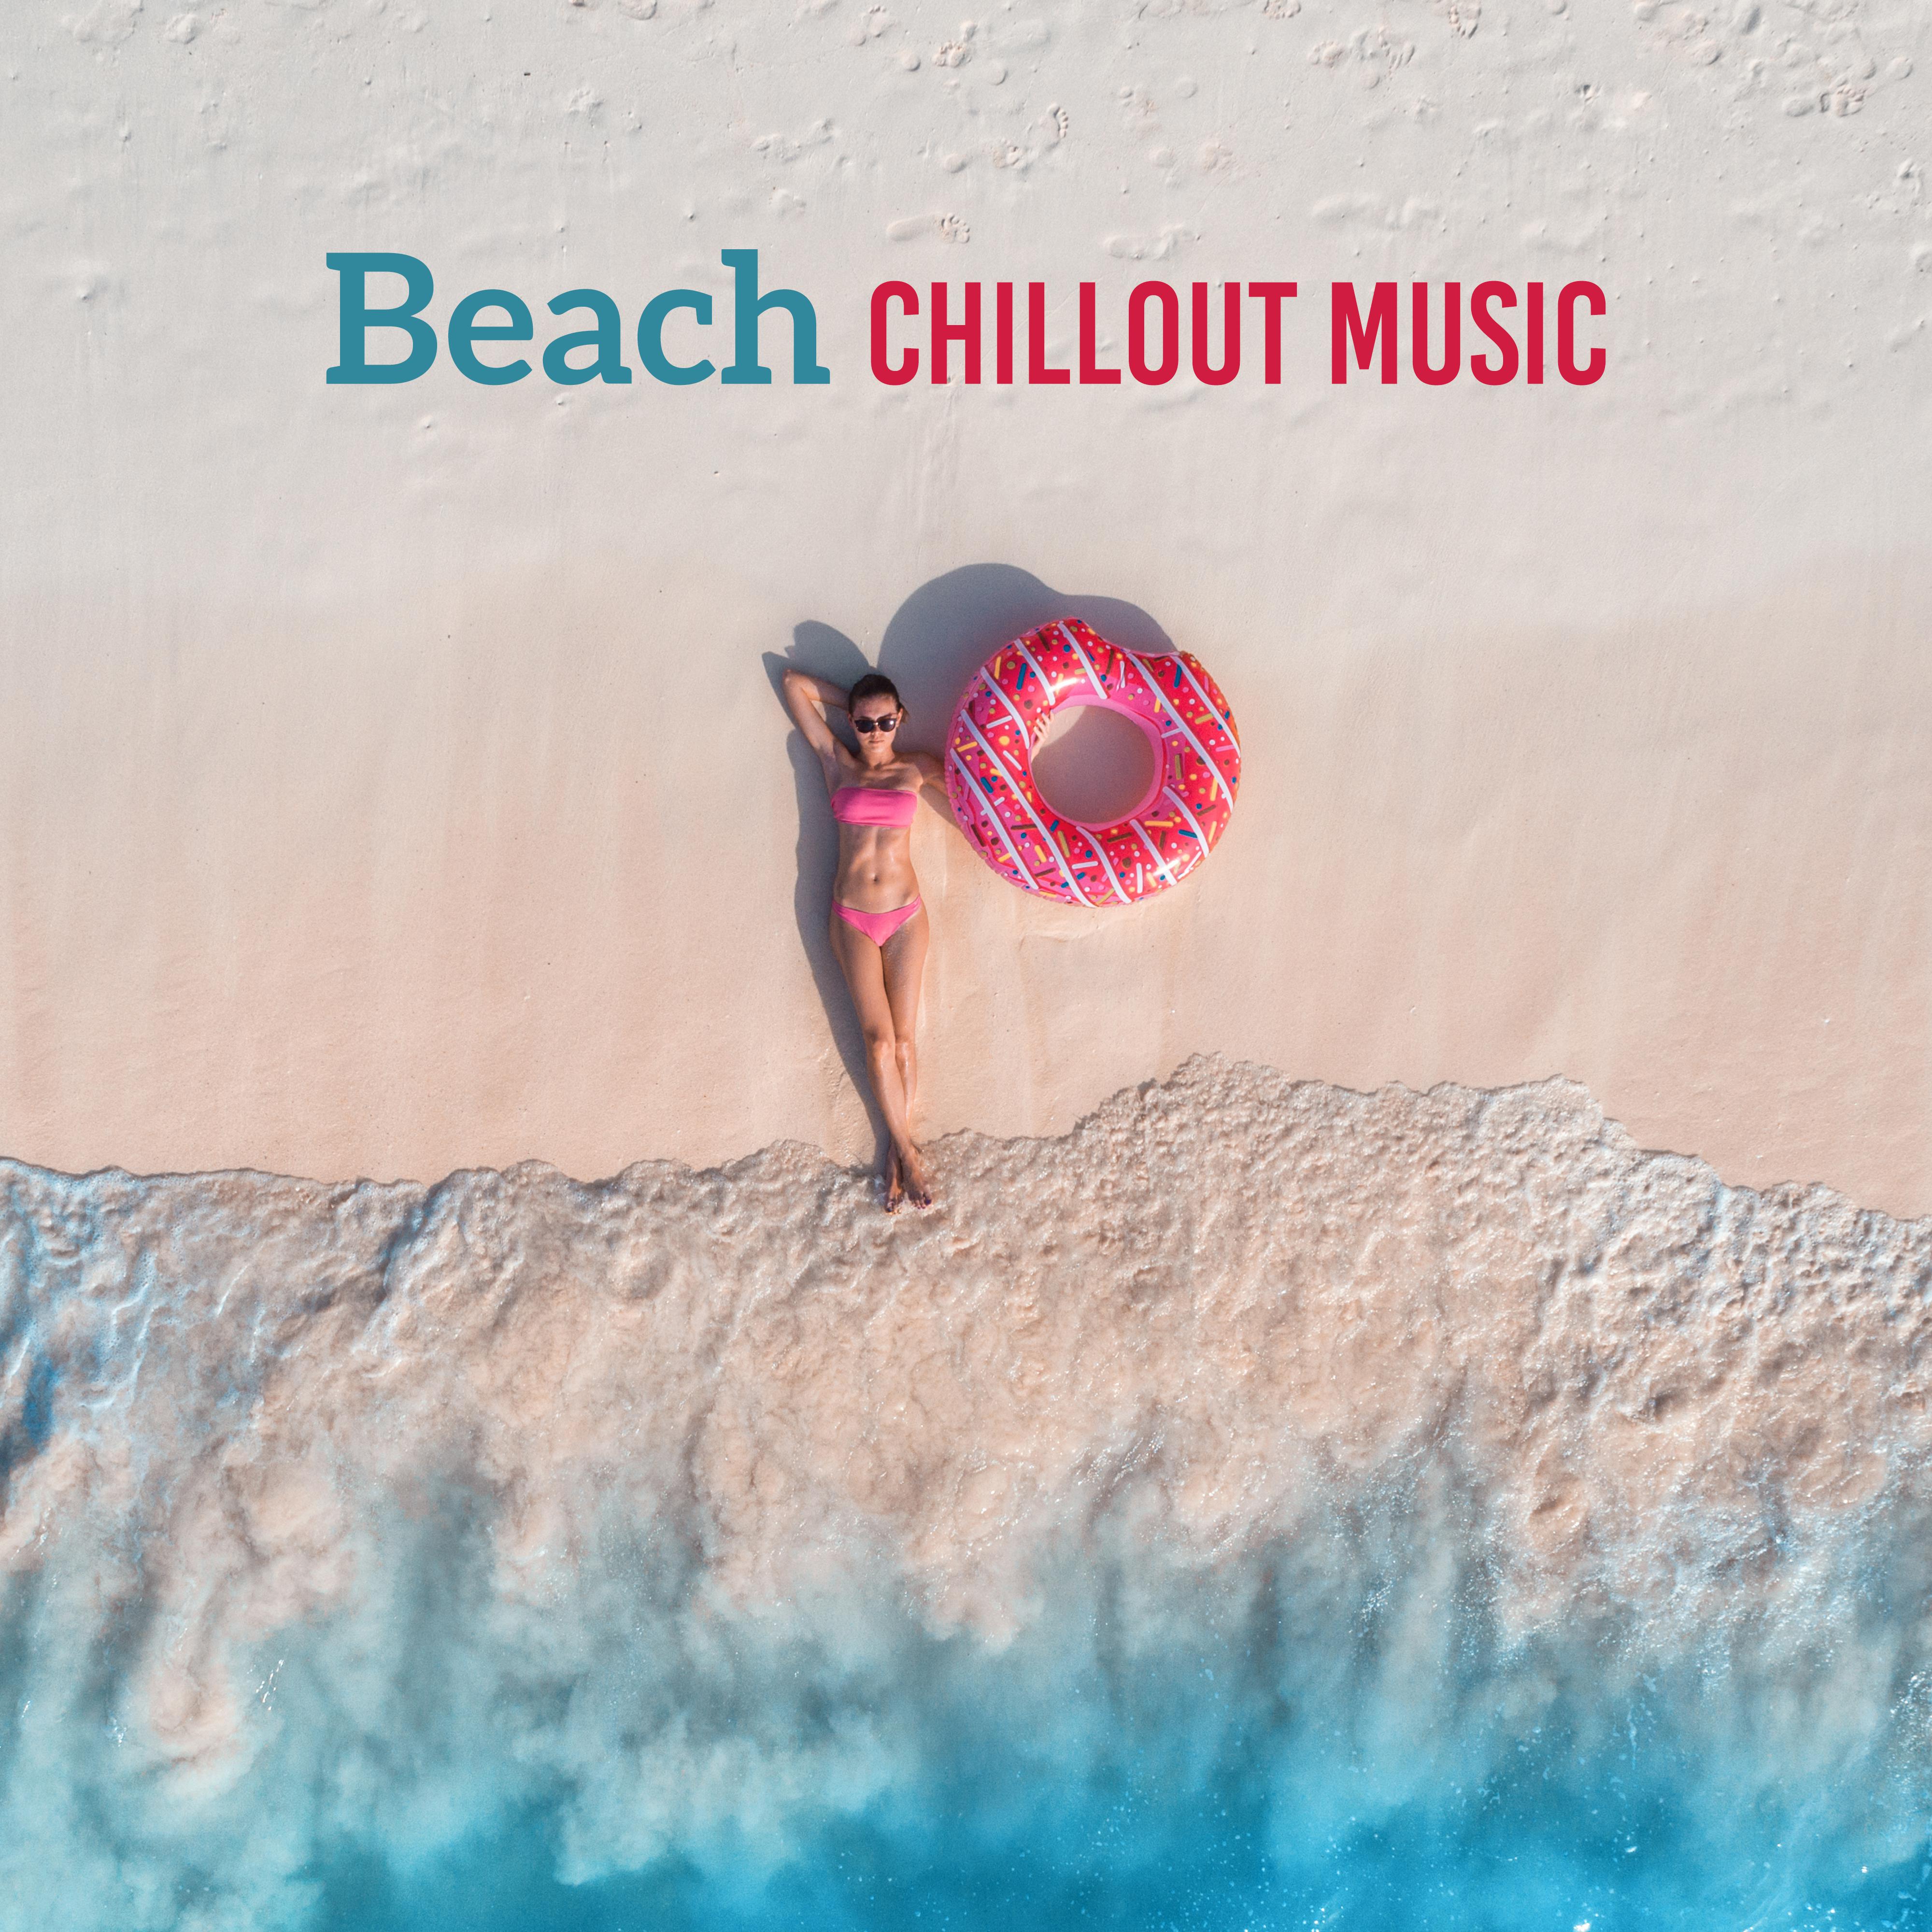 Beach Chillout Music  Summertime 2019, Deep Relax, Beach Music, Music Zone, Calm Down, Perfect Relax, Ibiza Chill Out